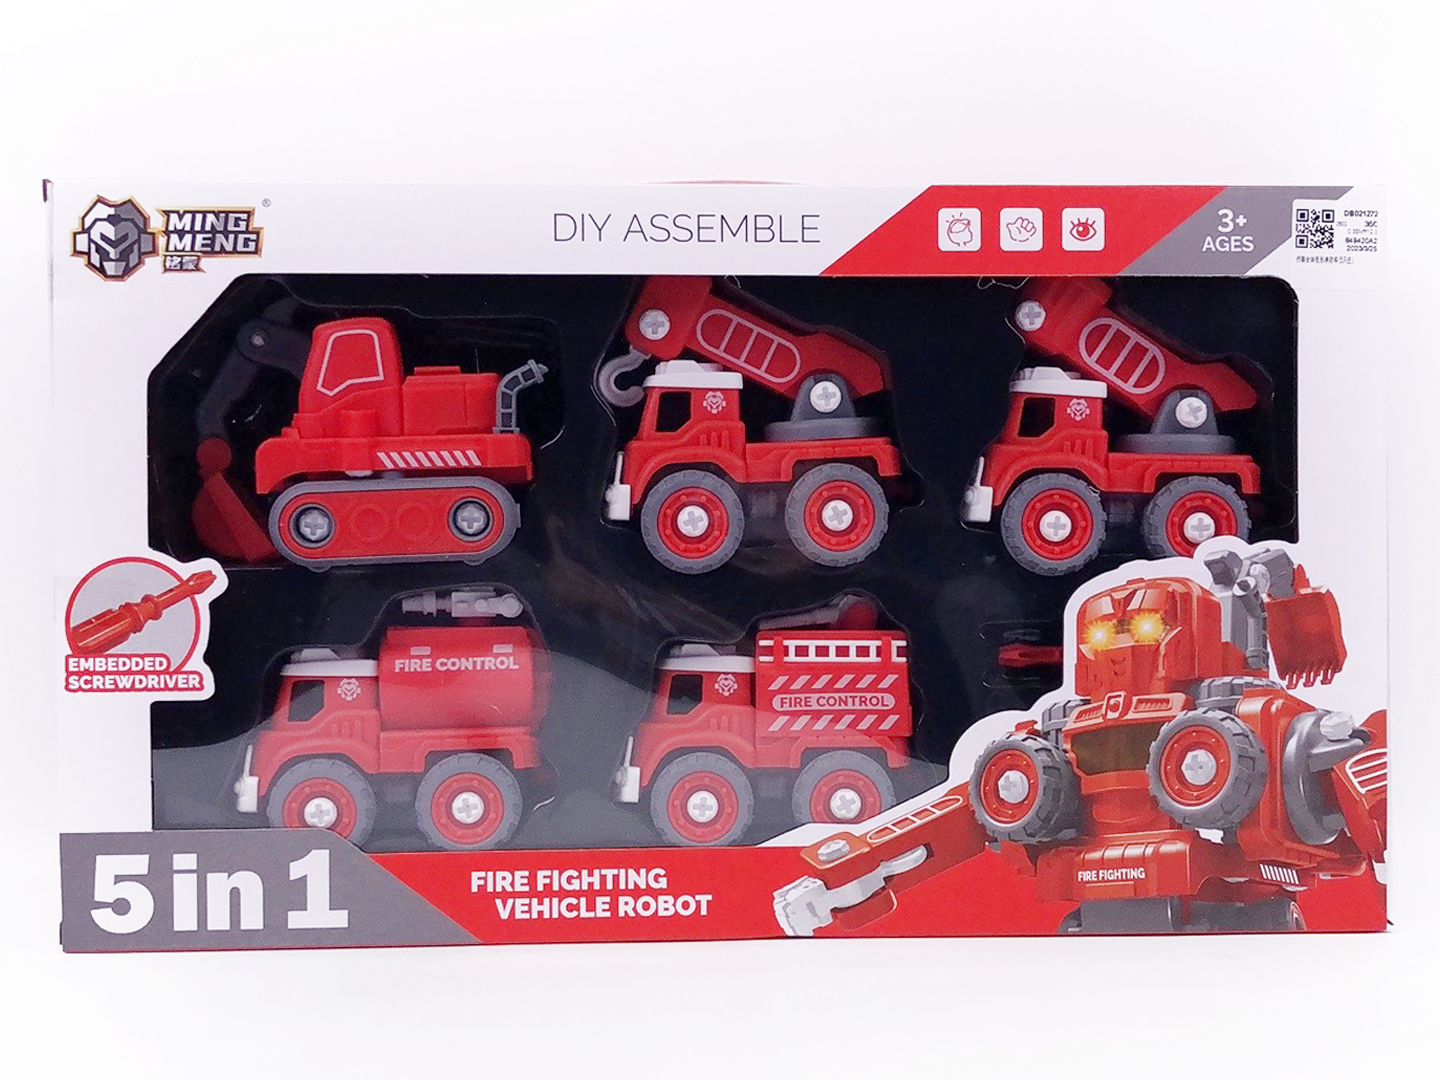 Diy Transforms Fire Engine(5in1) toys